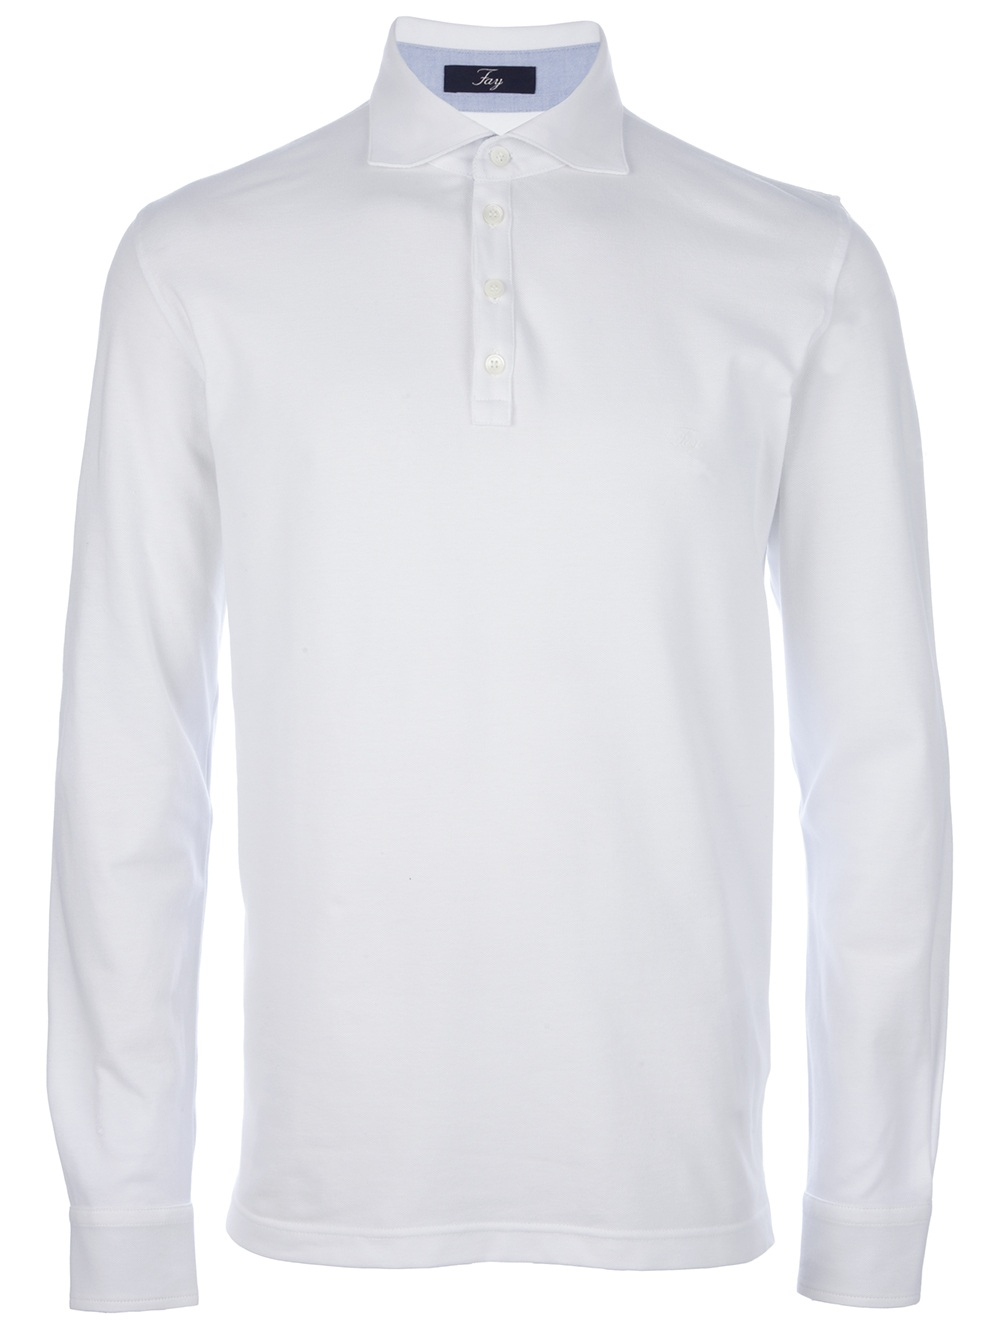 Fay Long Sleeve Polo Shirt in White for Men - Lyst